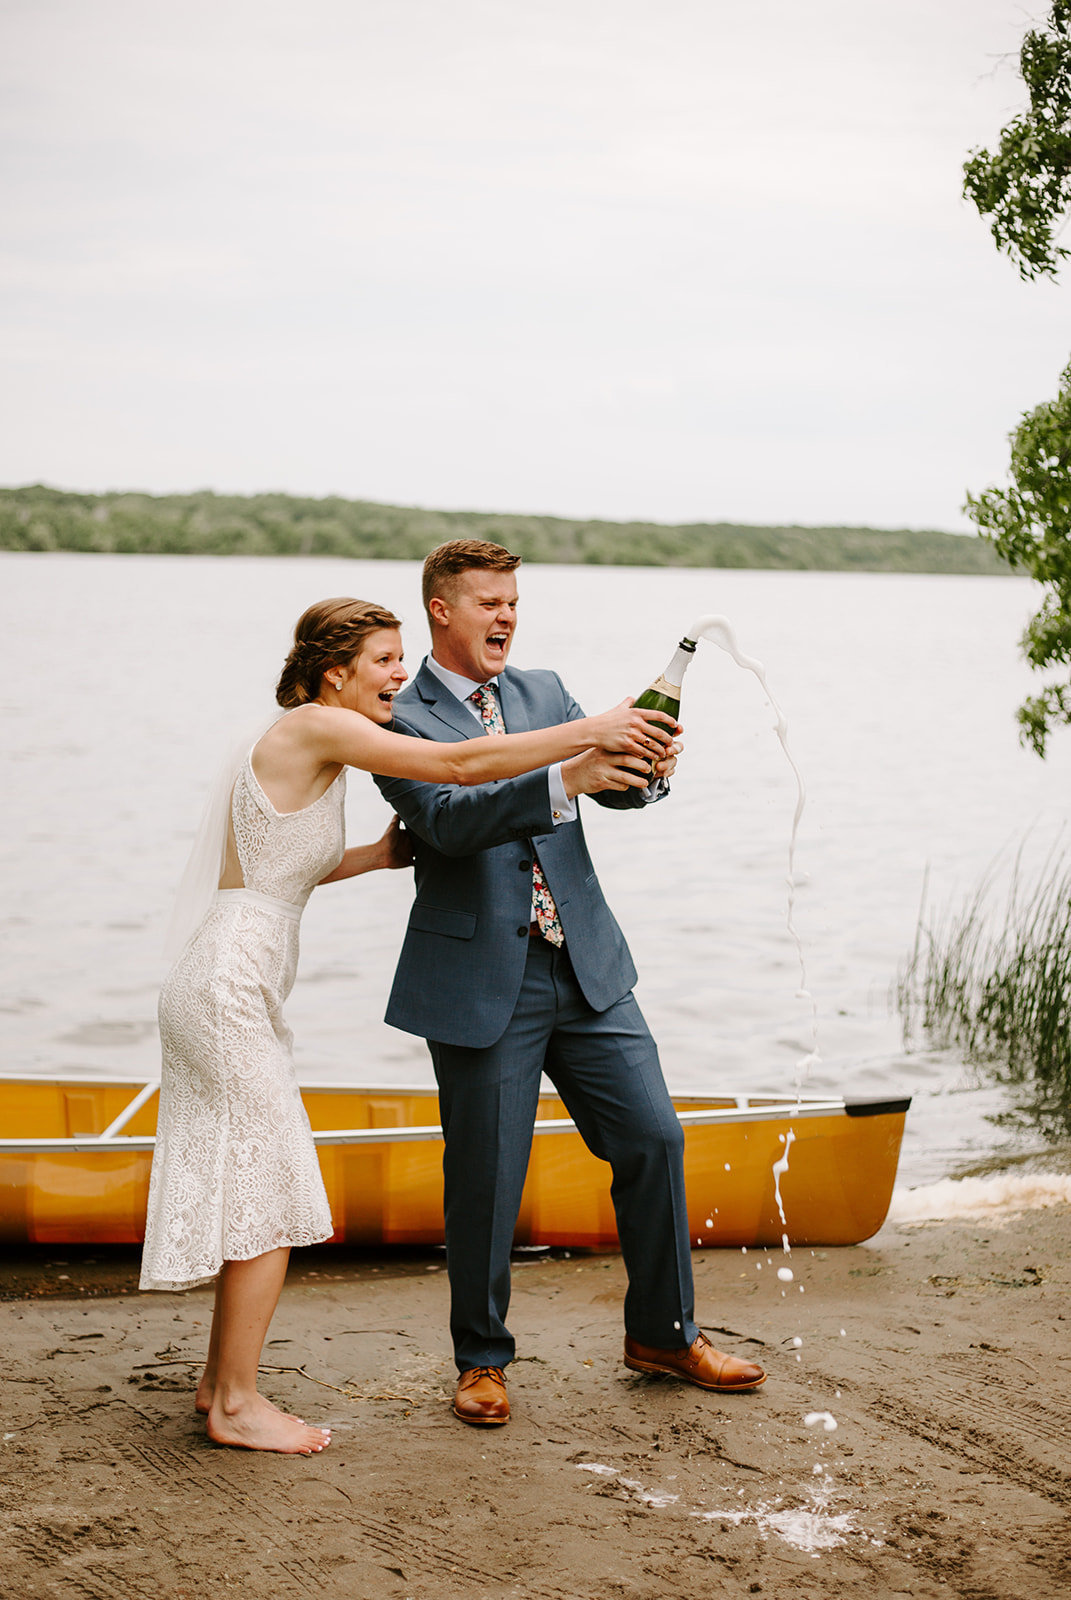 A Minnesota Bride and Groom popping champagne next to a lake and canoe on their elopement day